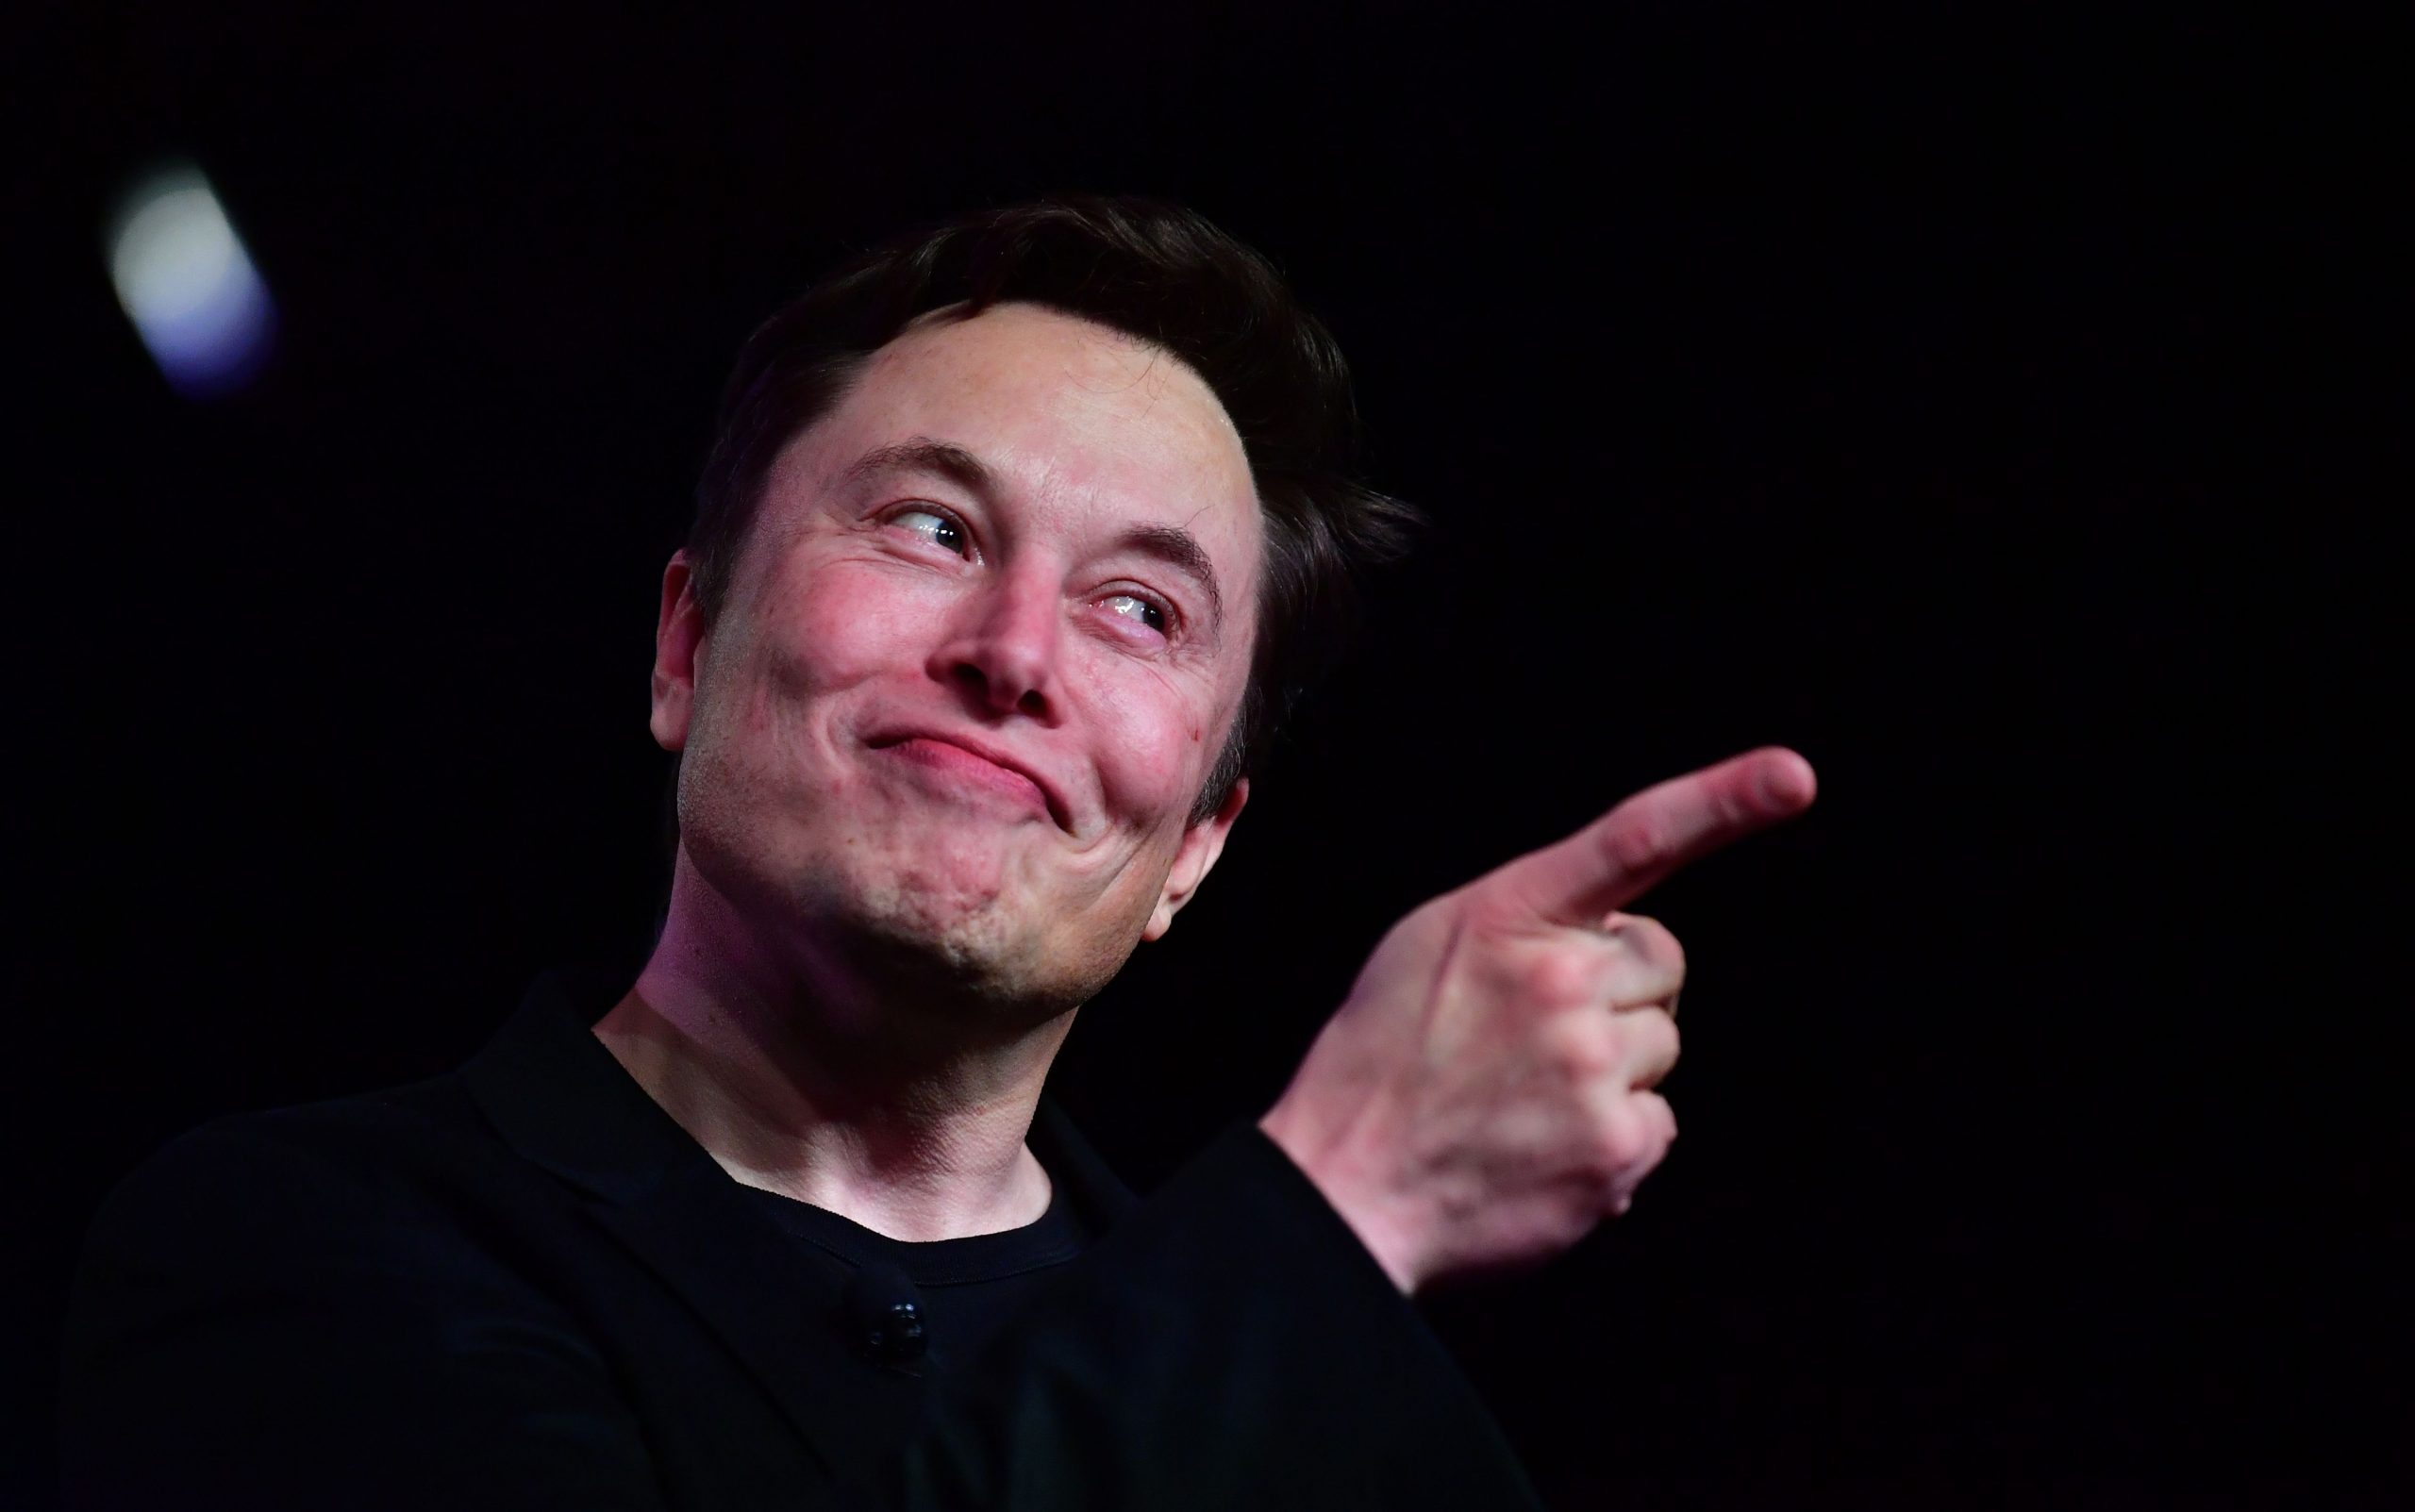 Elon Musk threatens to move Tesla out of California over restrictions